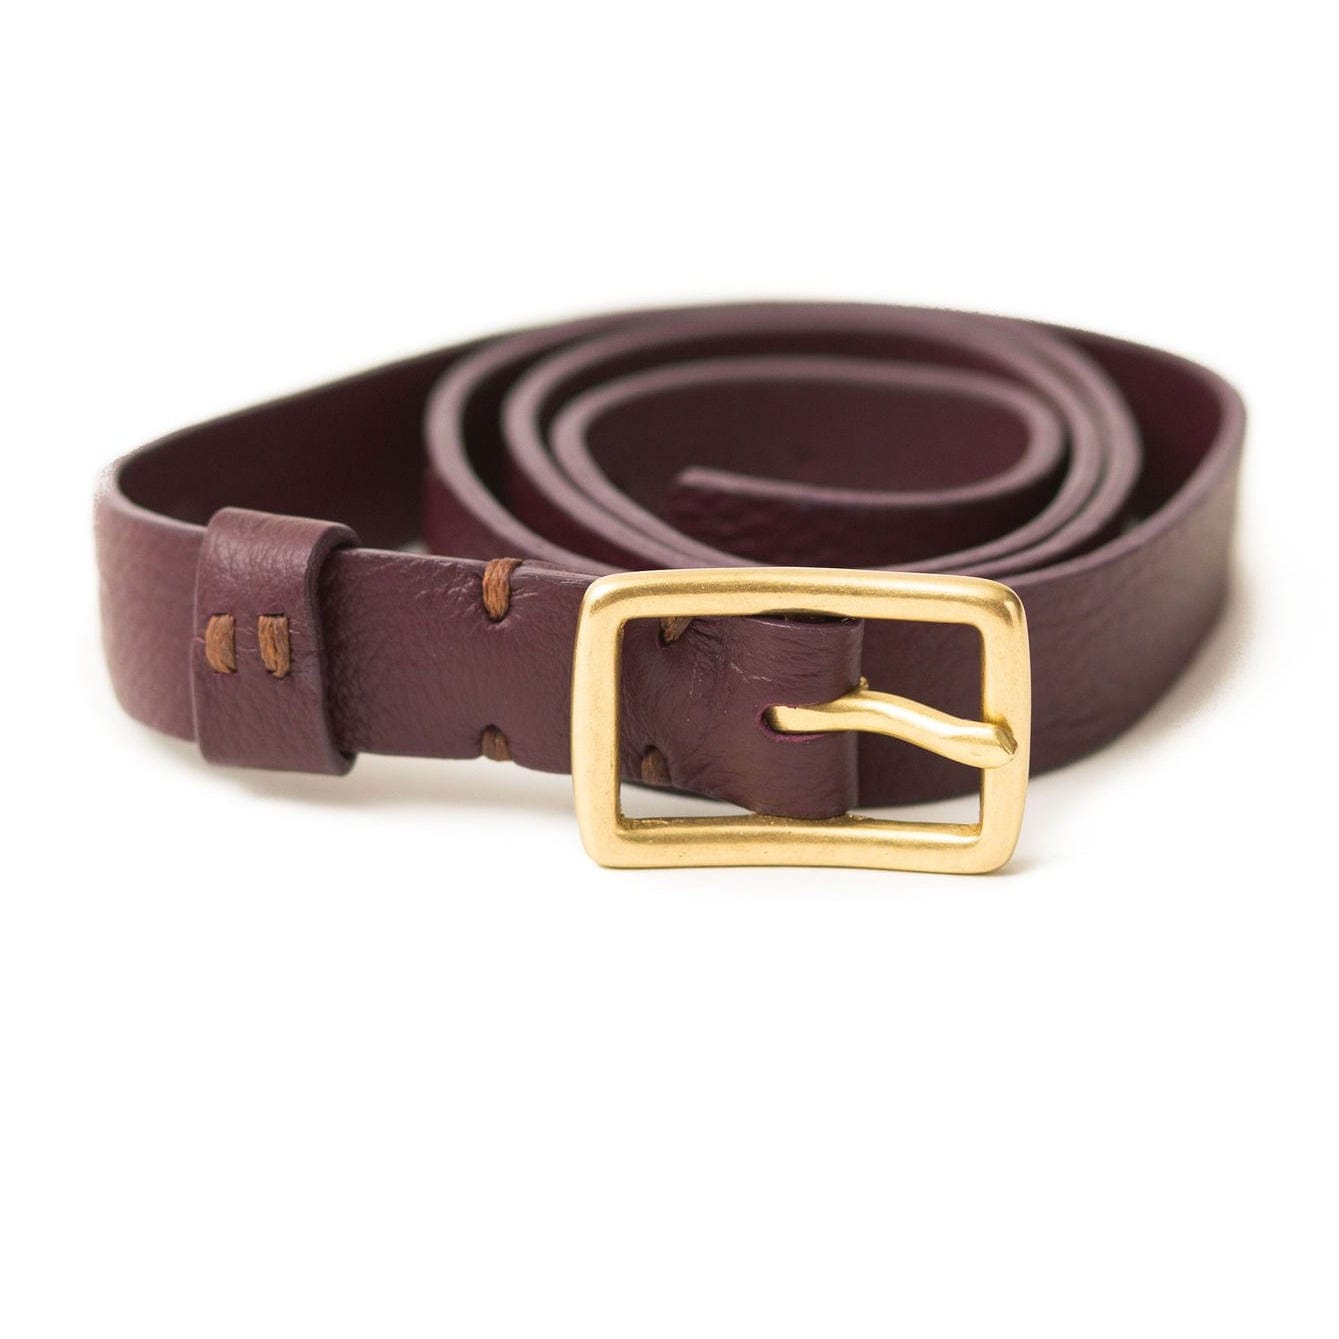 The Rosa belt in biking red oil leather is a classic style with a brass belt buckle.